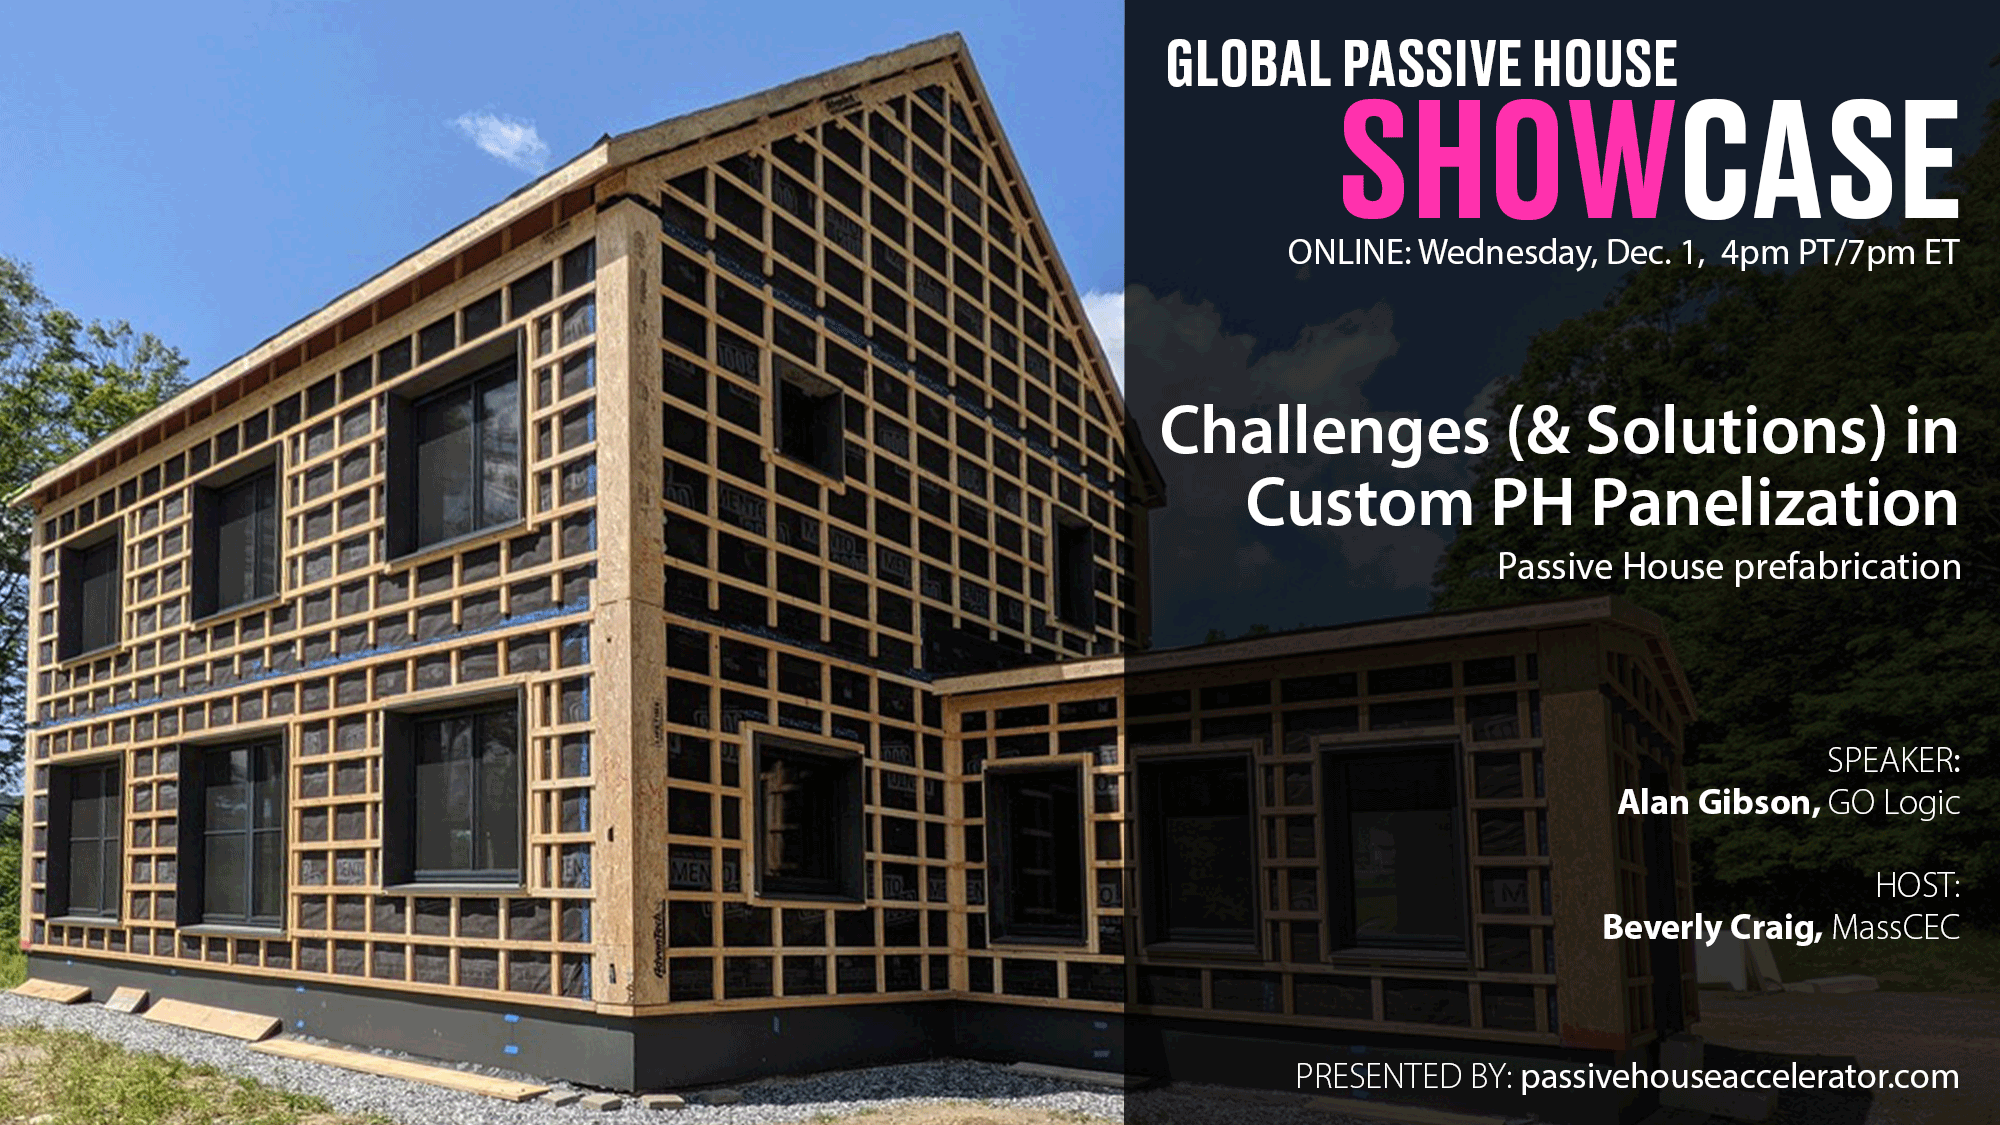 Challenges (and Solutions) in Custom Passive House Panelization